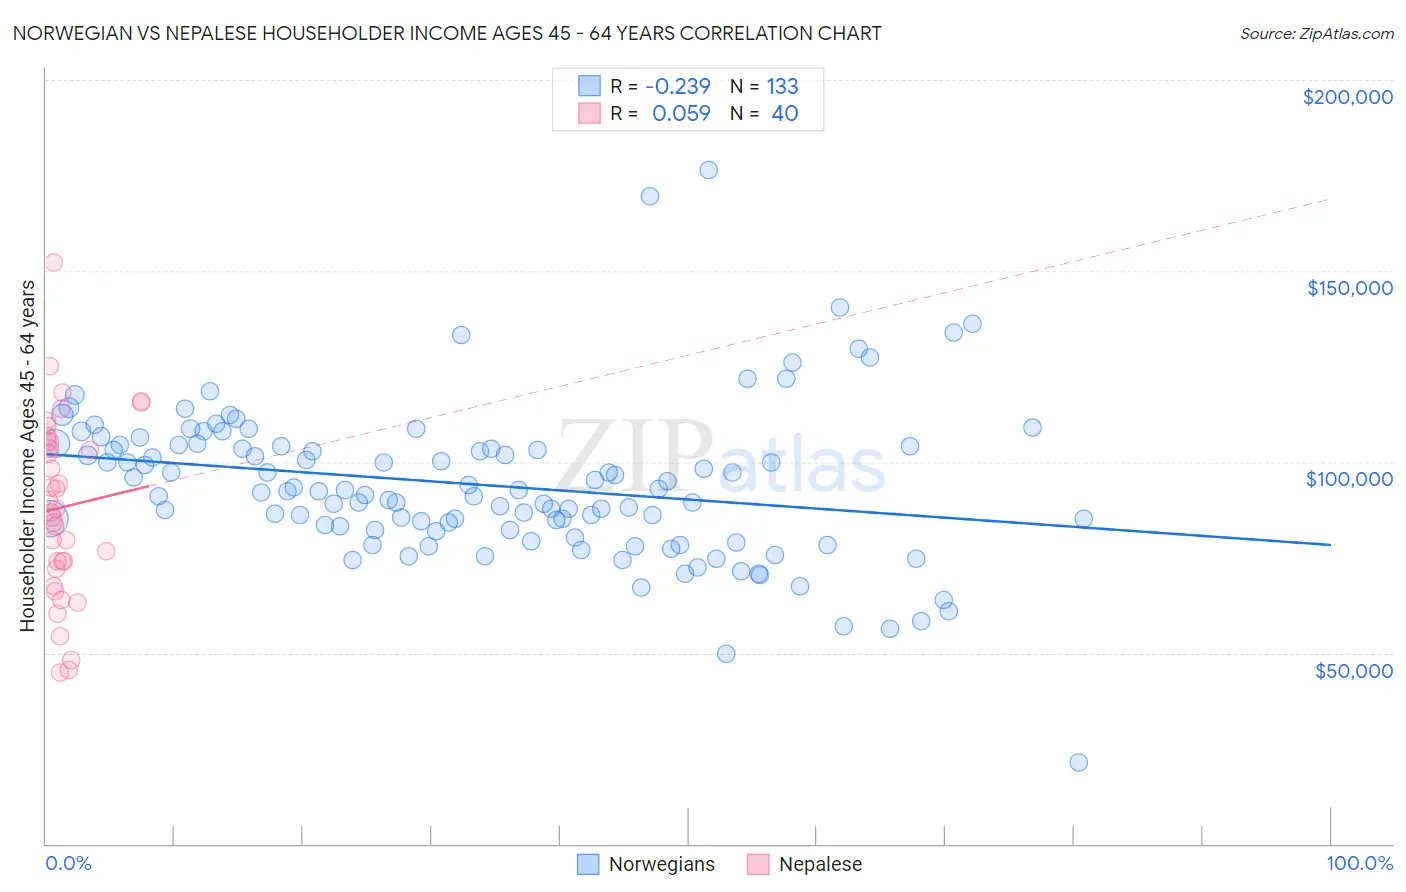 Norwegian vs Nepalese Householder Income Ages 45 - 64 years